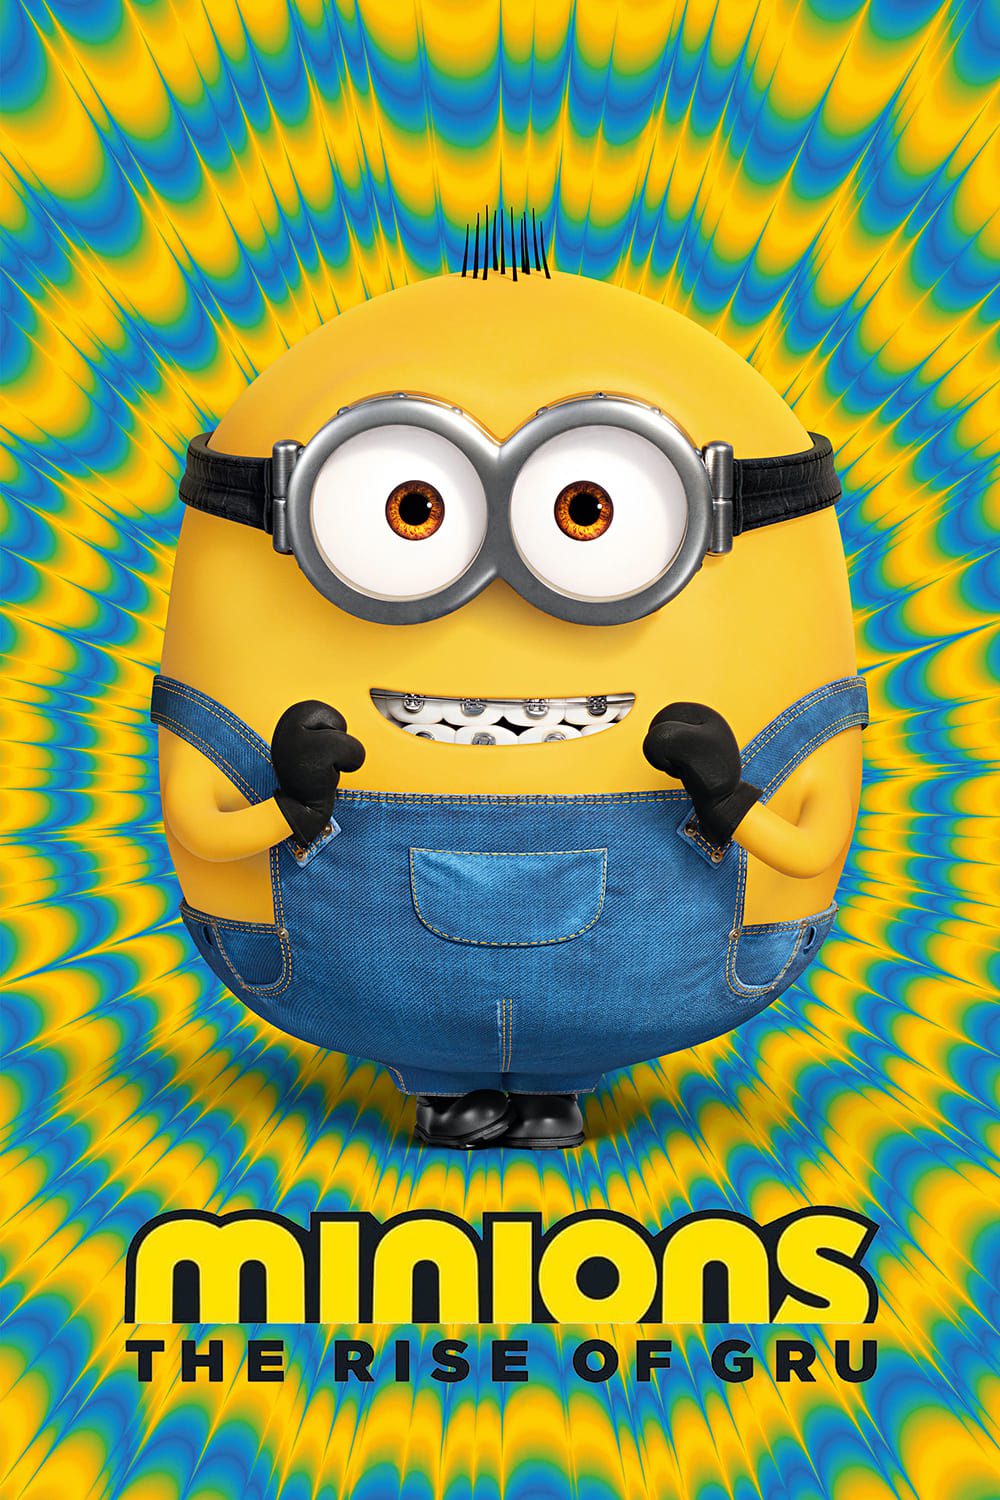 Poster for the movie "Minions: The Rise of Gru"